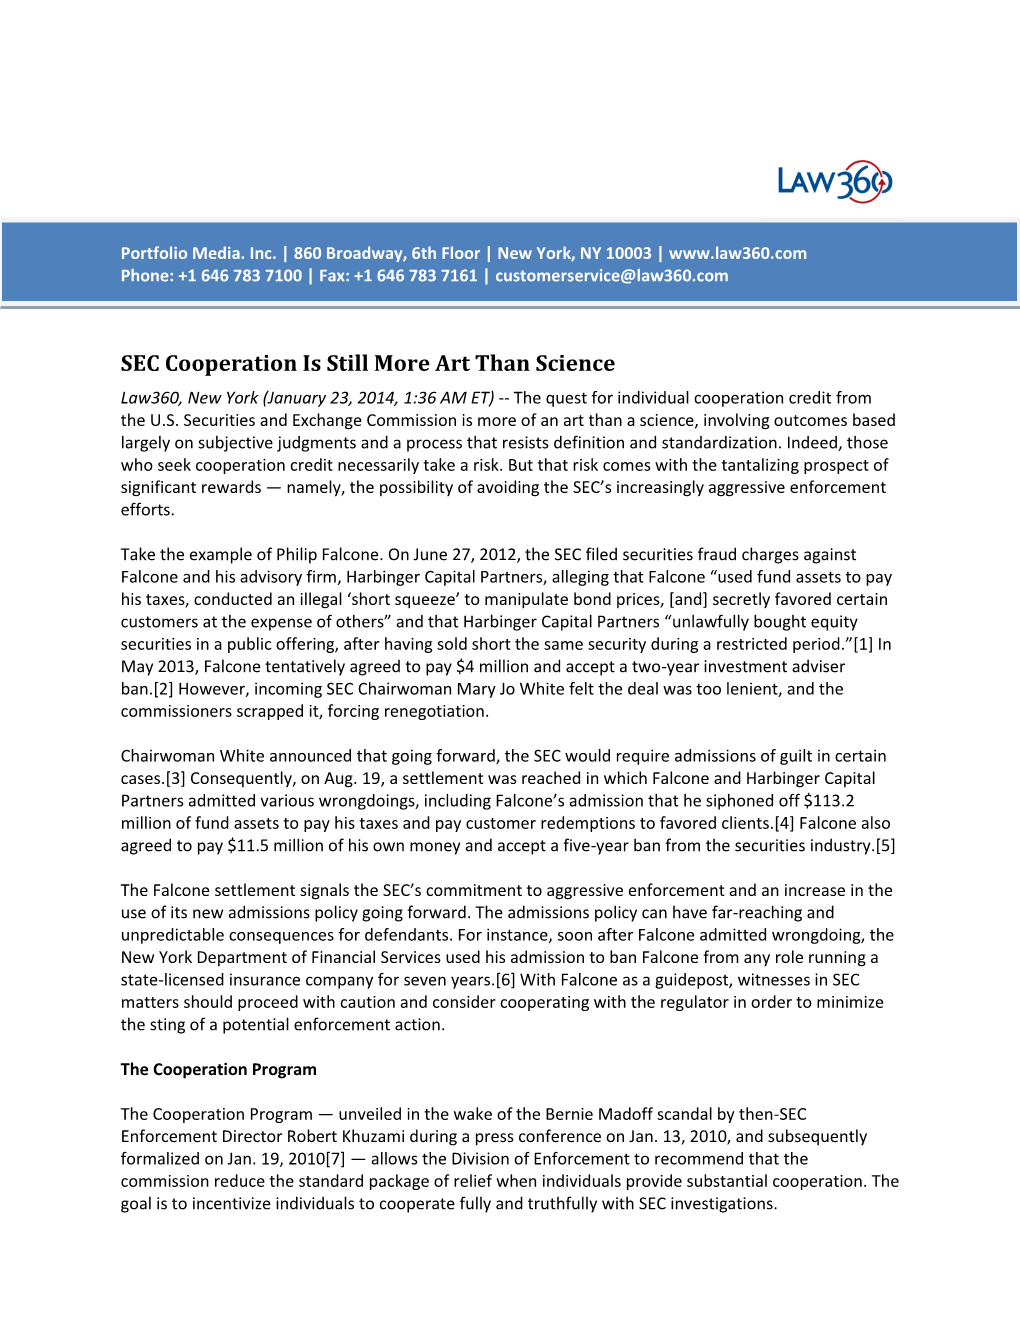 SEC Cooperation Is Still More Art Than Science Law360, New York (January 23, 2014, 1:36 AM ET) -- the Quest for Individual Cooperation Credit from the U.S